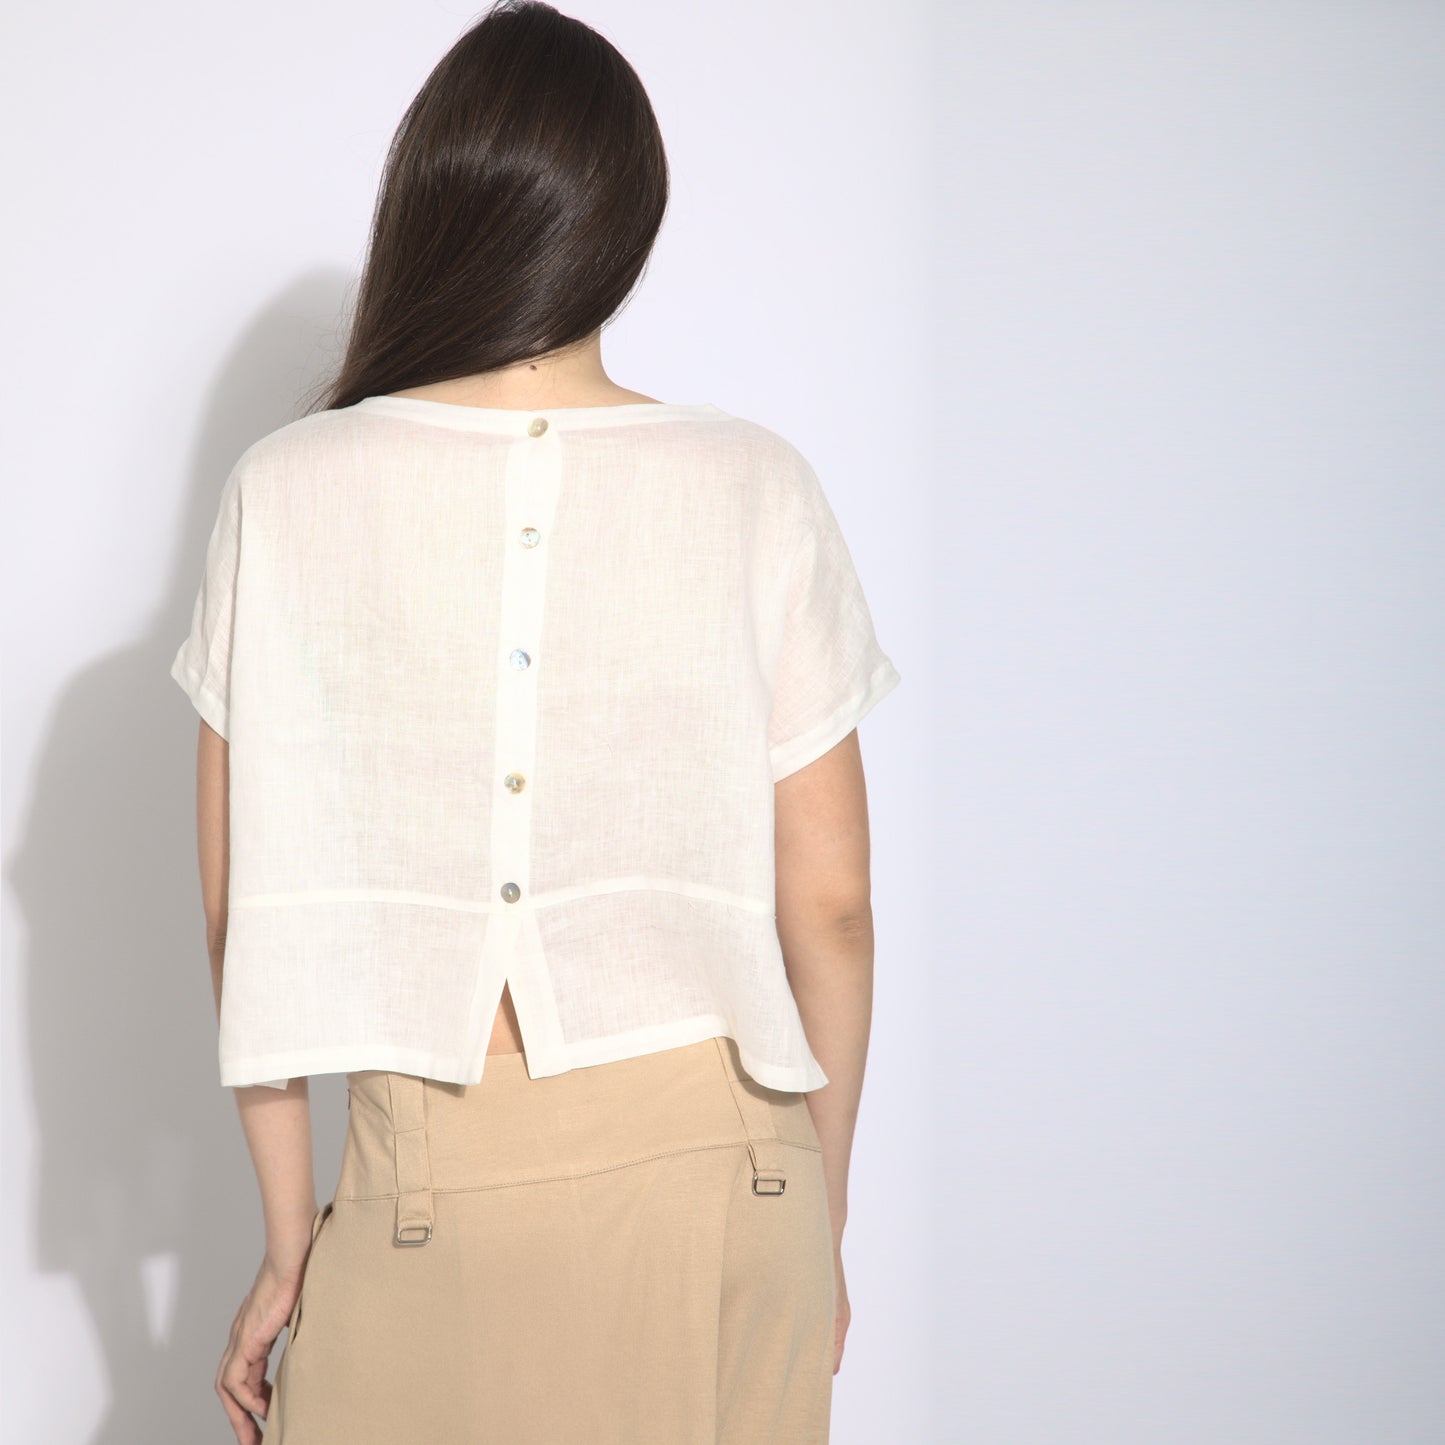 Giulia - Blouse in pure linen, short sleeves